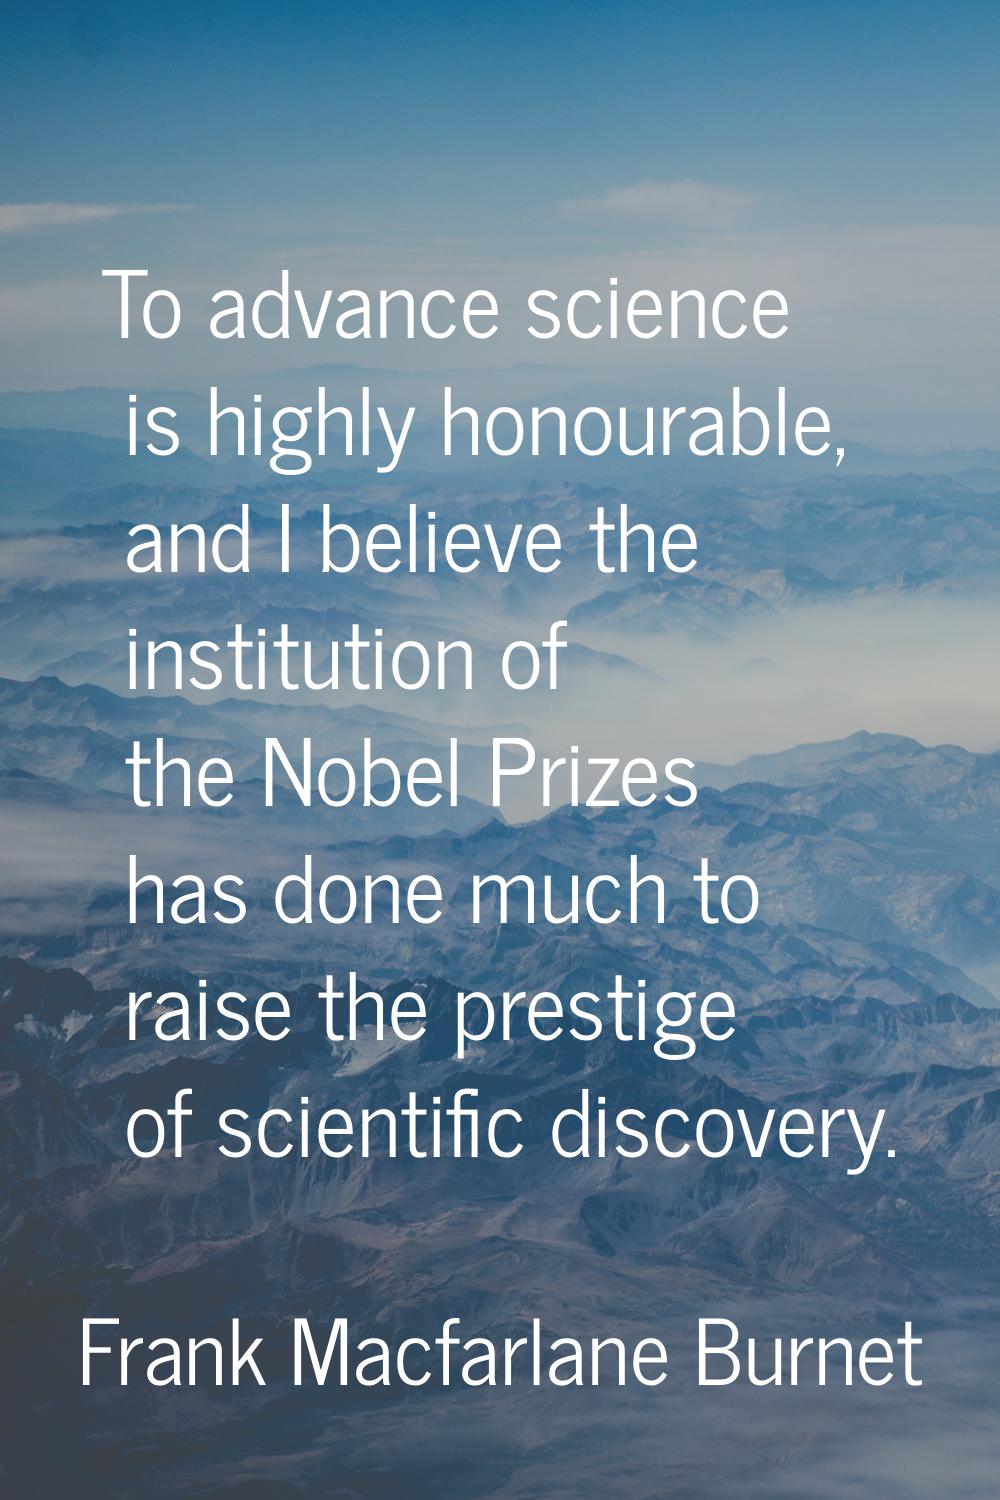 To advance science is highly honourable, and I believe the institution of the Nobel Prizes has done